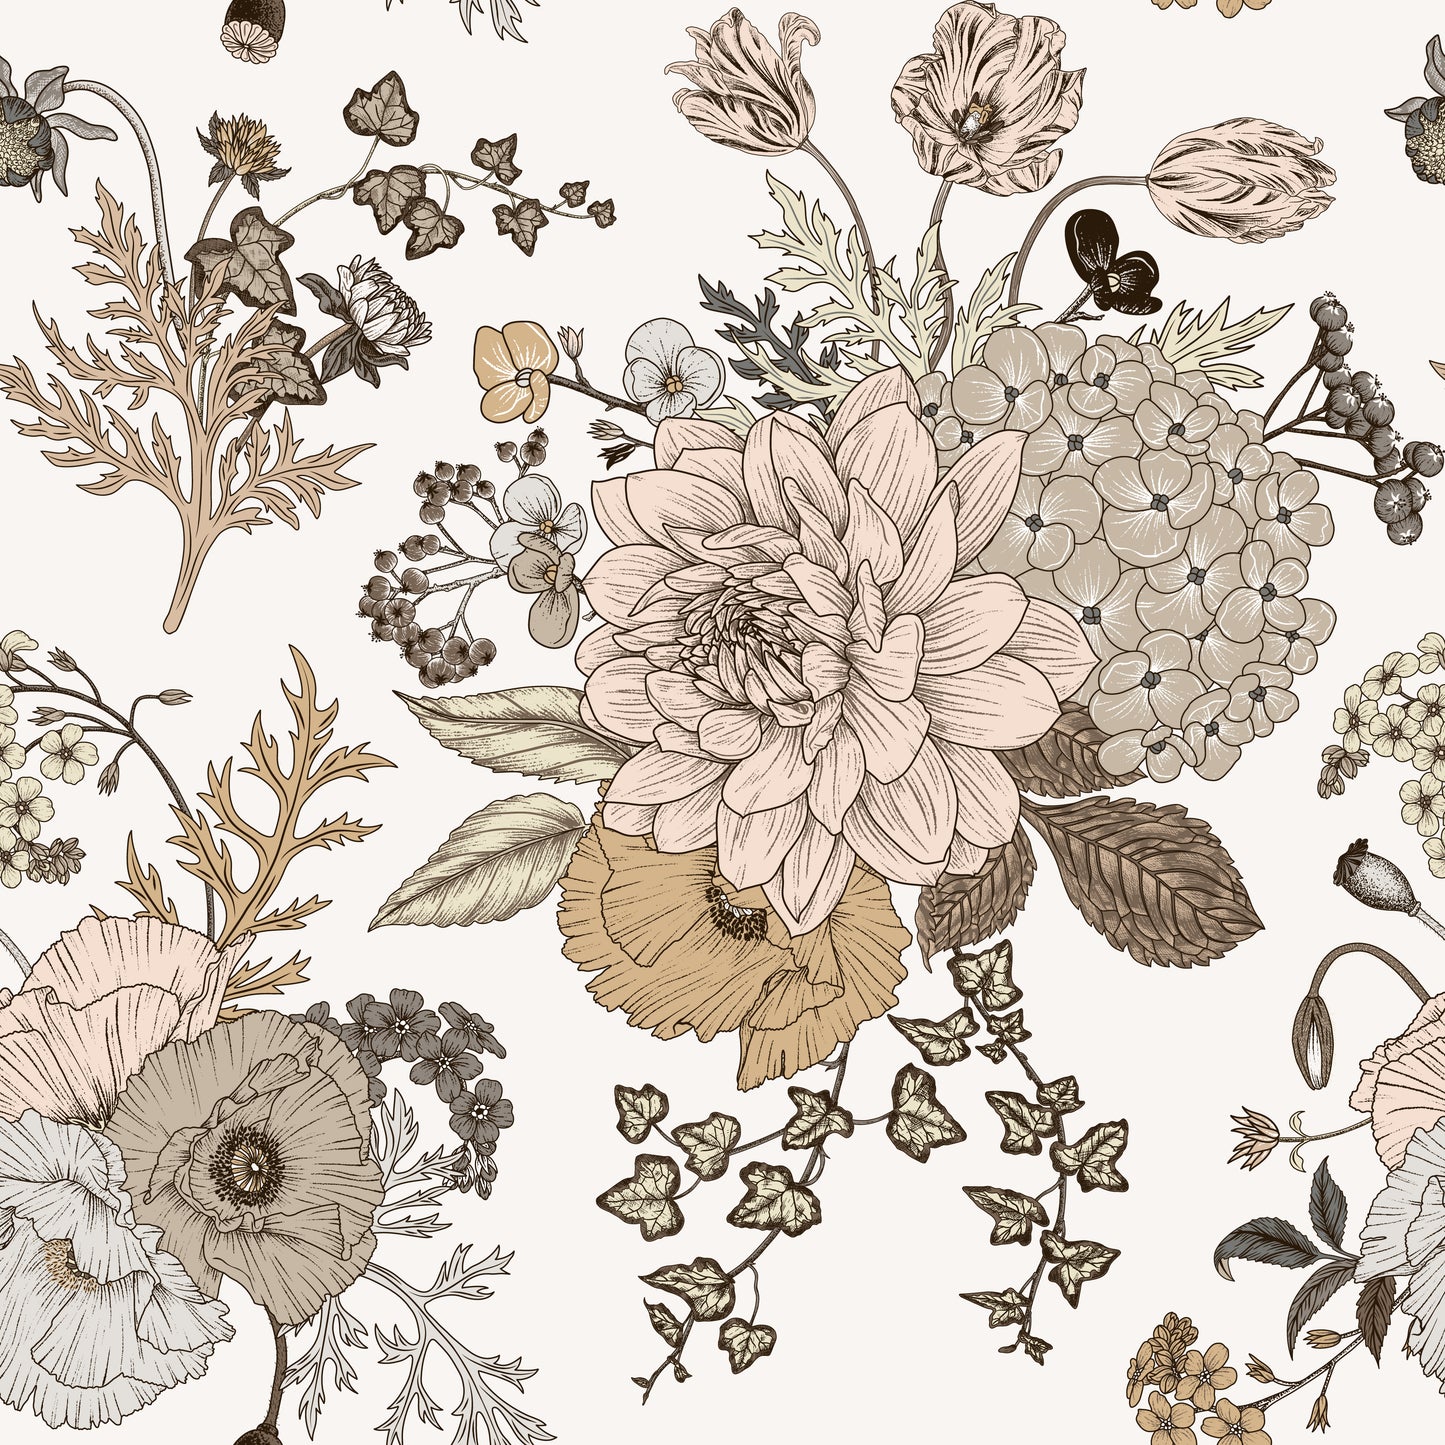 Vintage boho bouquet taupe, brown and cream floral bouquet print on white background easy to install and remove peel and stick custom wallpaper available in different lengths/sizes locally created and printed in Canada wallpaper. Washable, durable, commercial grade, removable and waterproof.